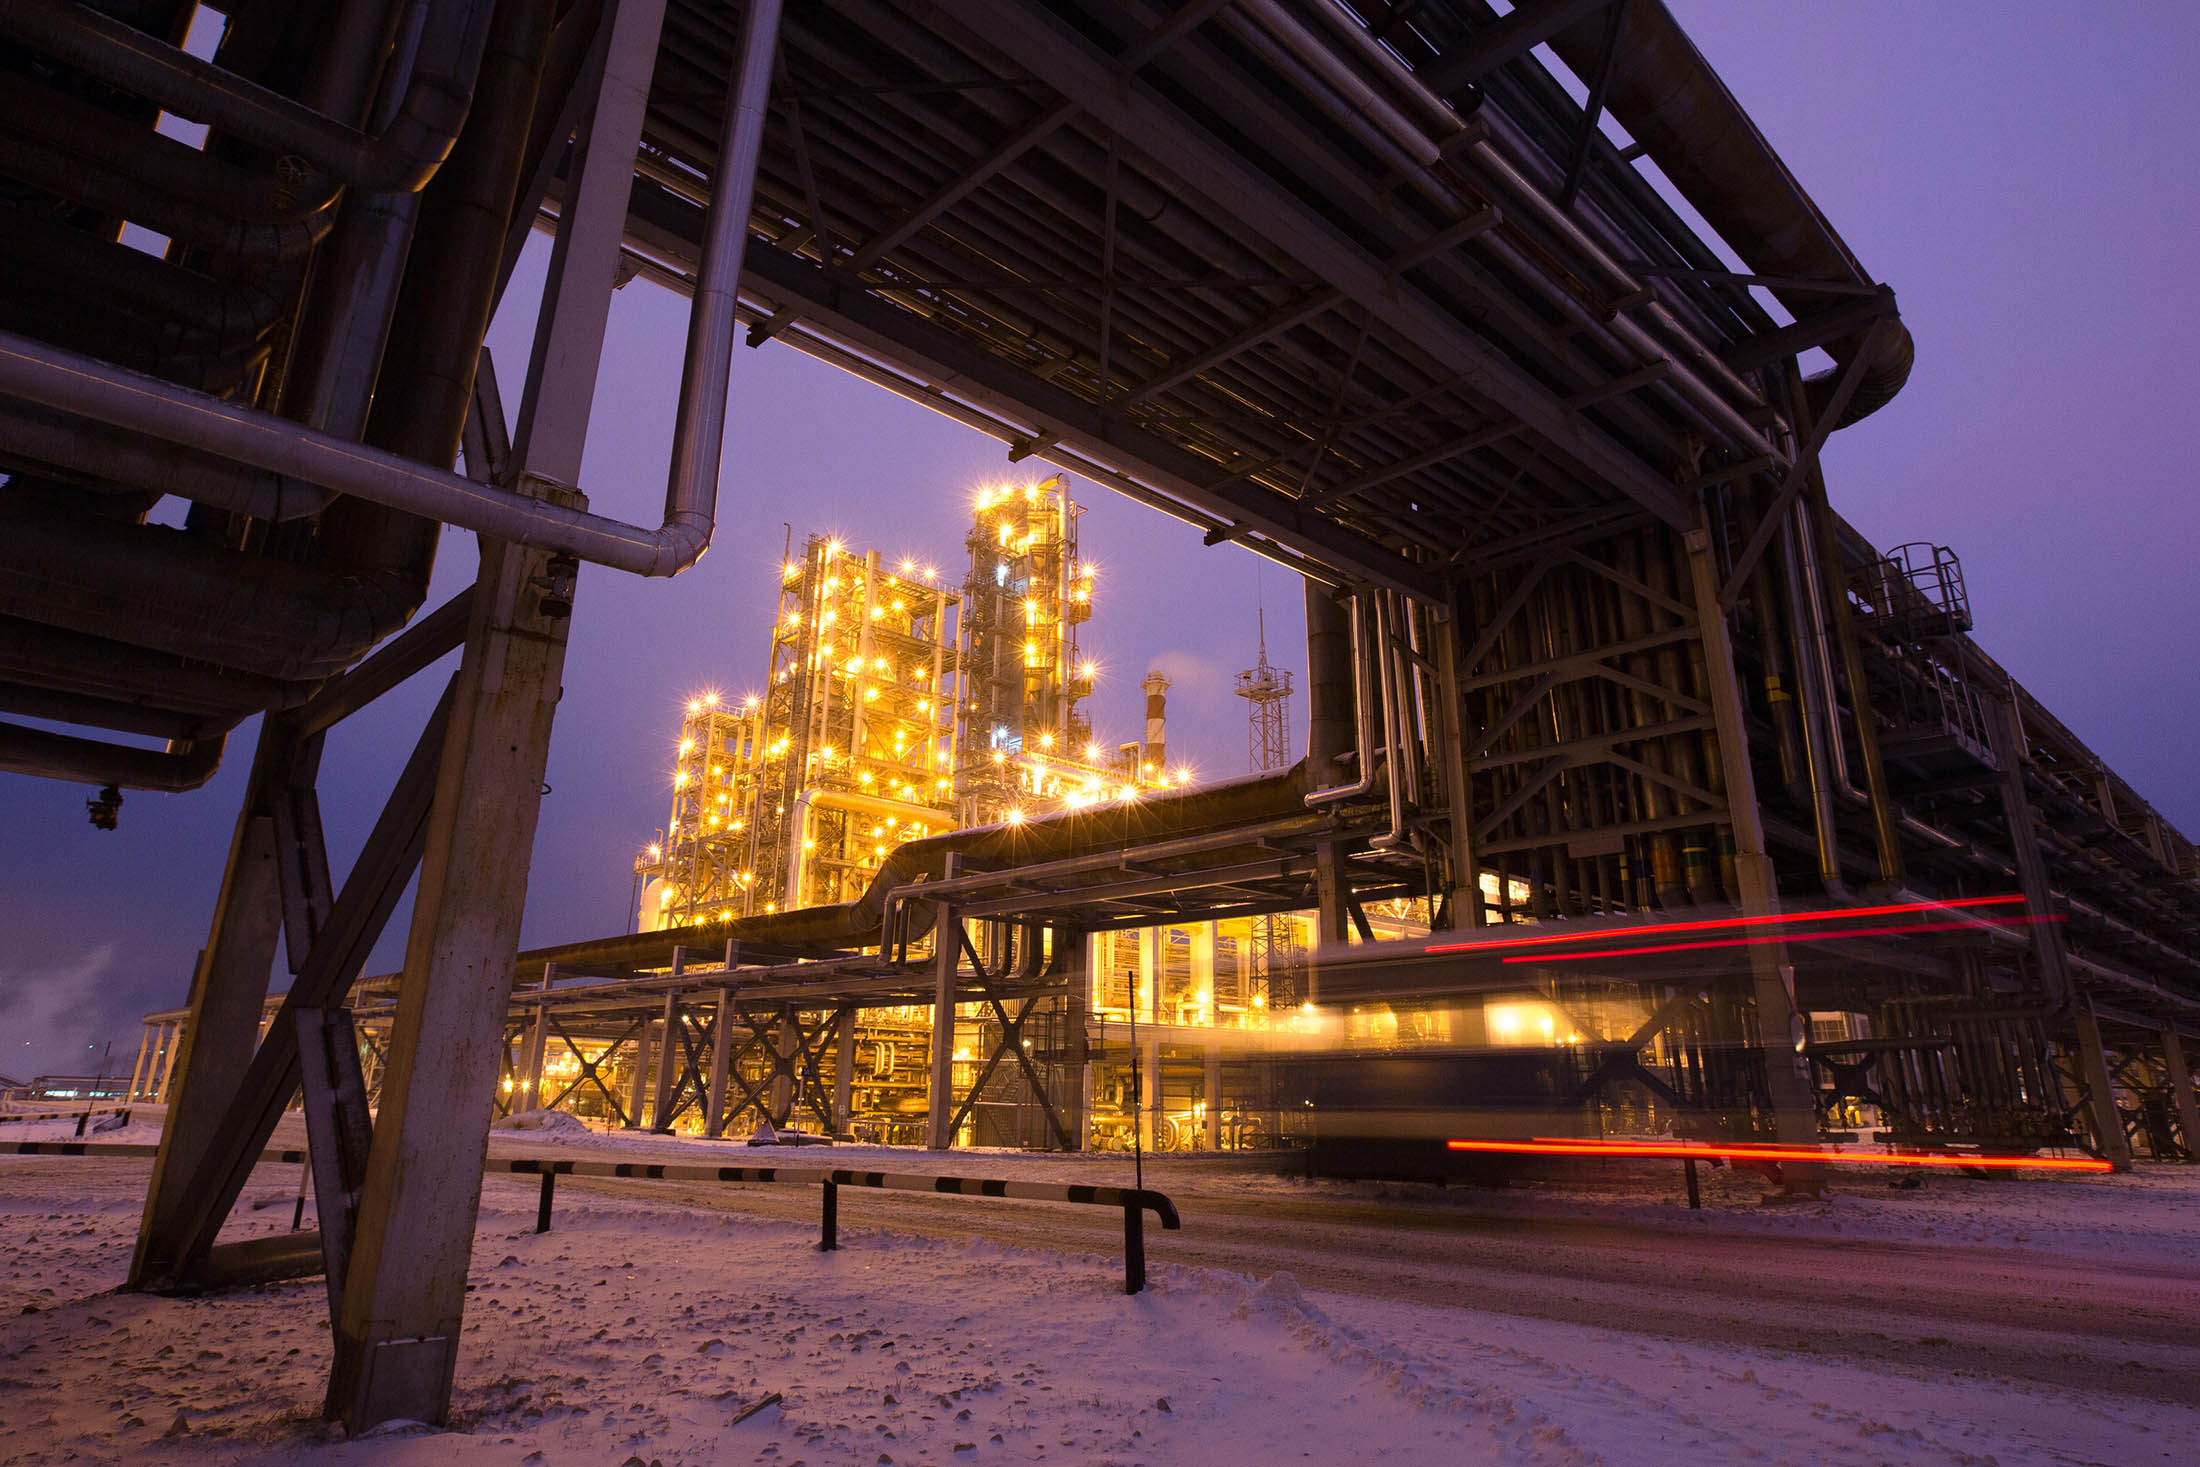 A light trail from an automobile passes beneath overhead pipework near illuminated petroleum cracking towers at the Lukoil-Nizhegorodnefteorgsintez oil refinery, operated by OAO Lukoil, in Nizhny Novgorod, Russia, on Thursday, Dec. 4, 2014. Crude slumped 18 percent last month as the Organization of Petroleum Exporting Countries maintained its output quota, letting prices decrease to a level that may slow U.S. production.
